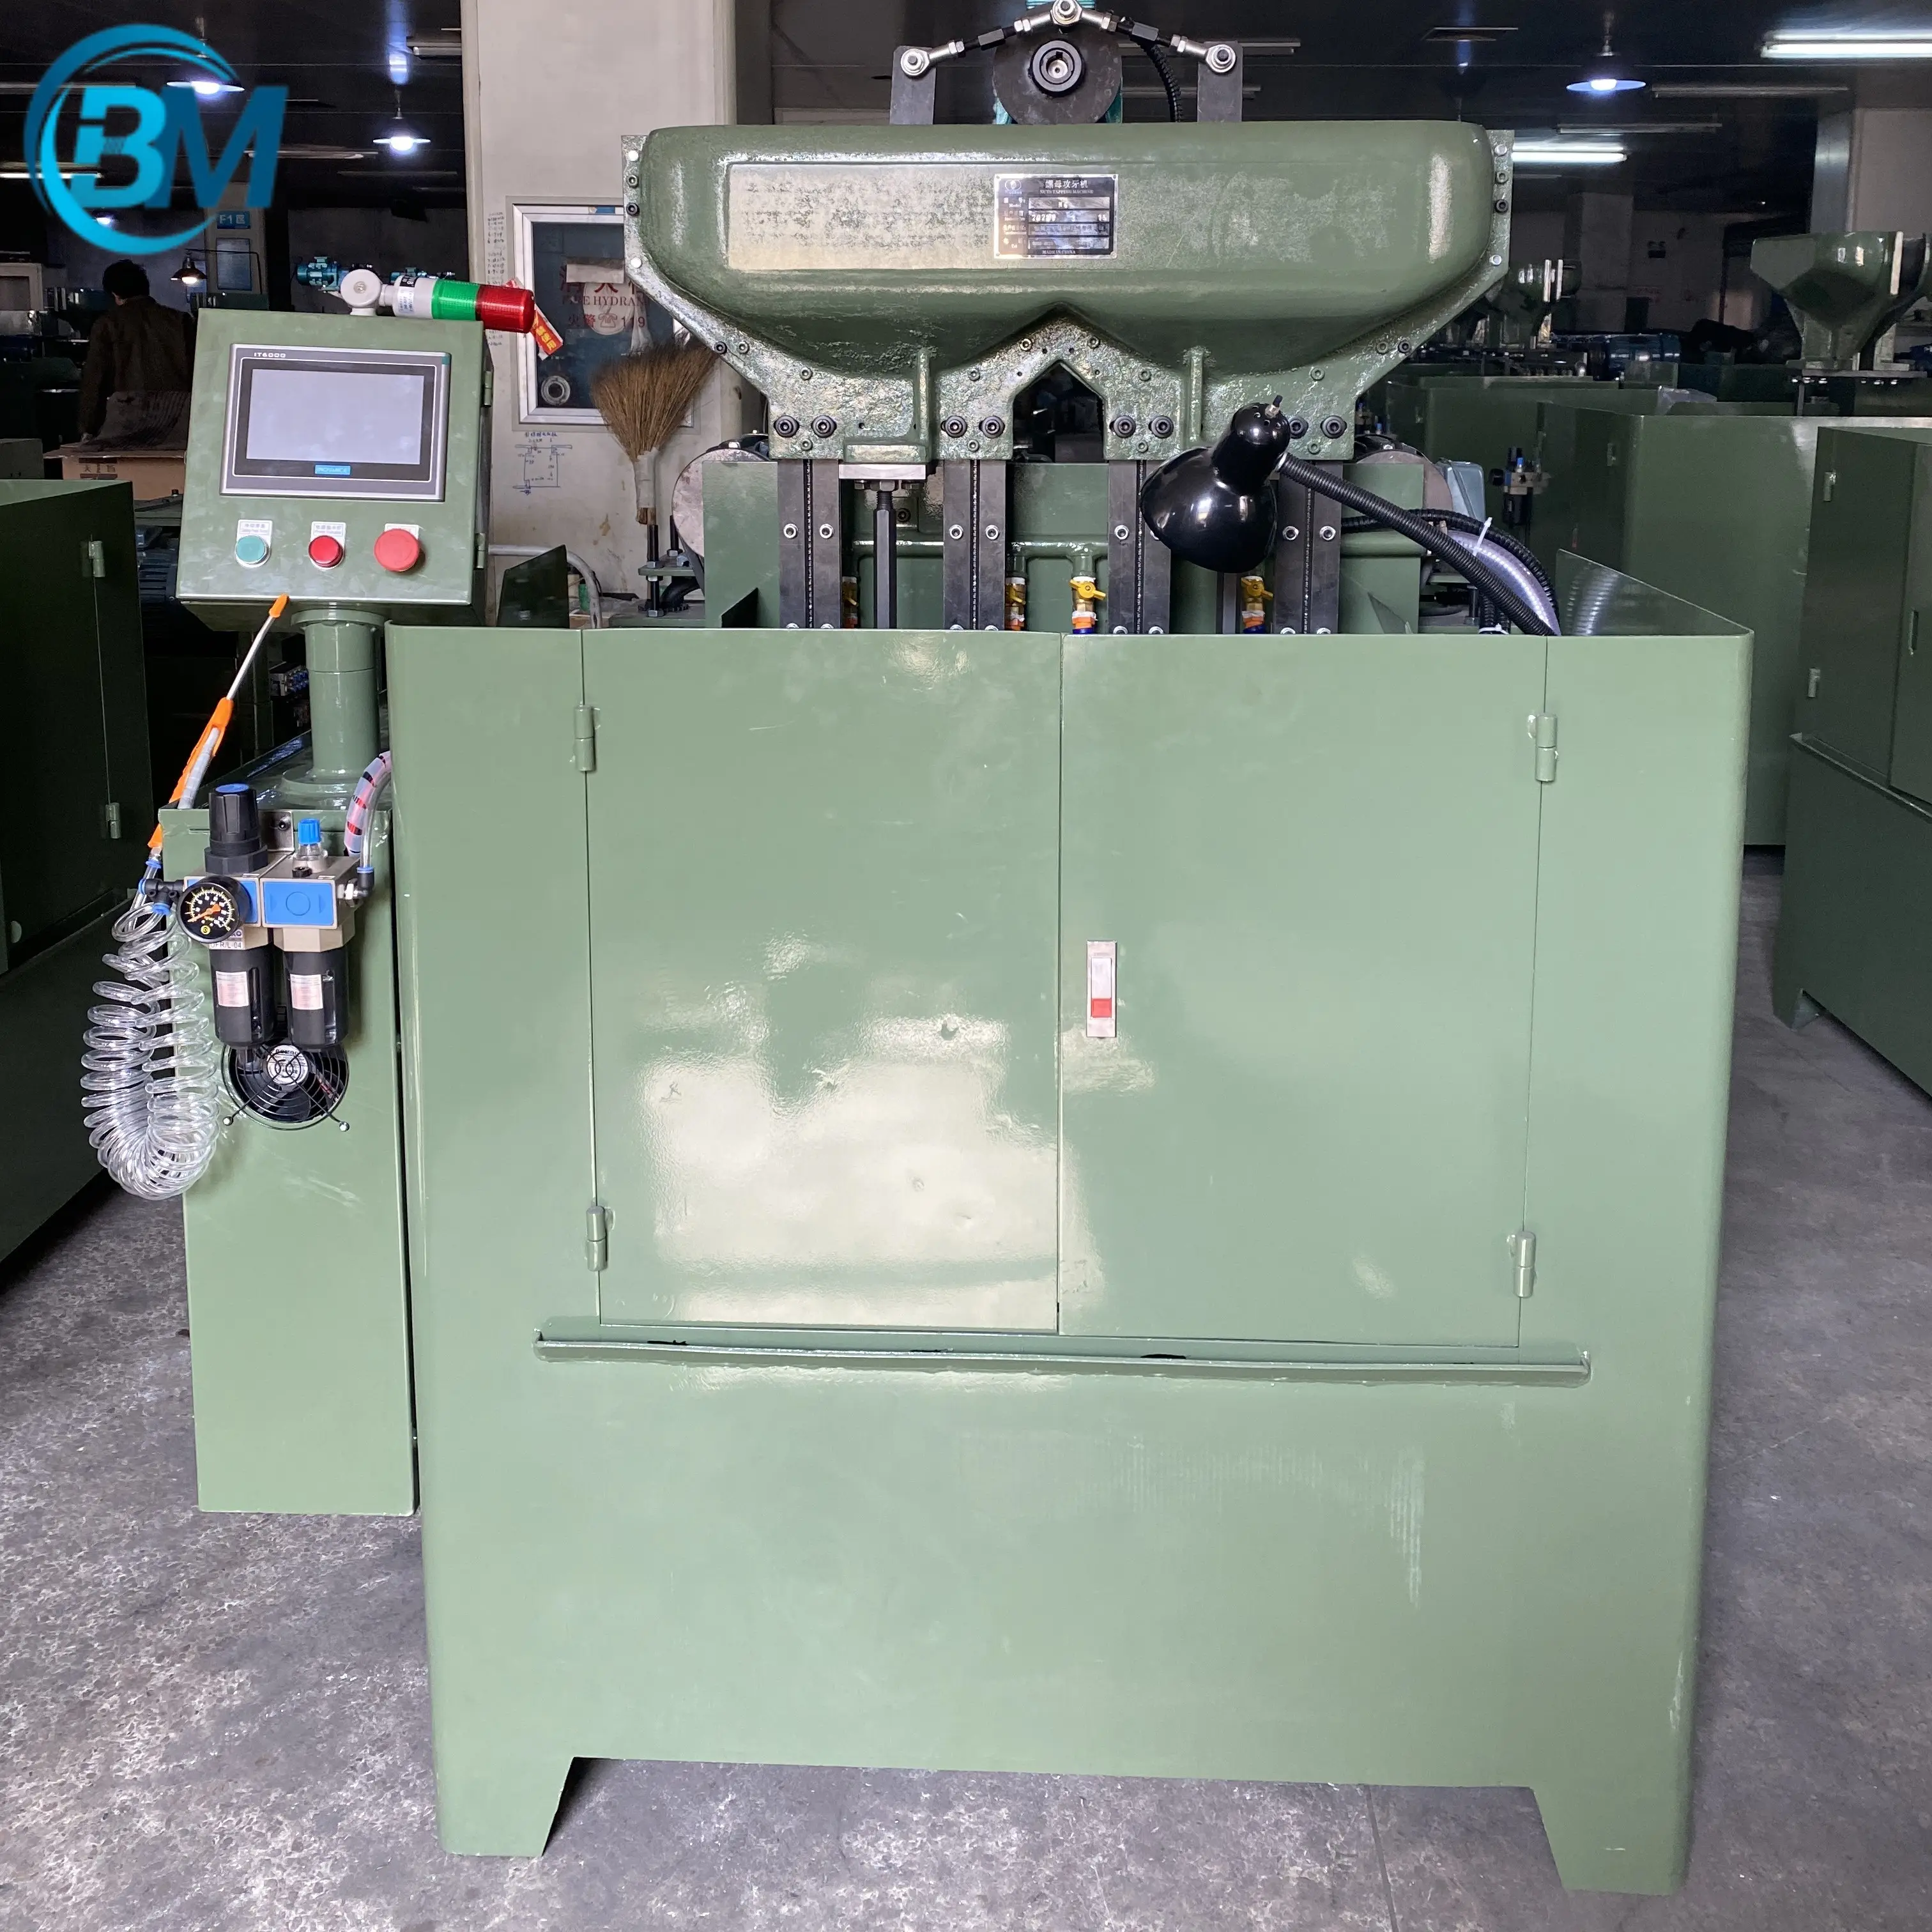 Hot sales nut threading machine 2 spindle or 4 spindle Nut tapping machine for Tapping standard nuts and special fasteners